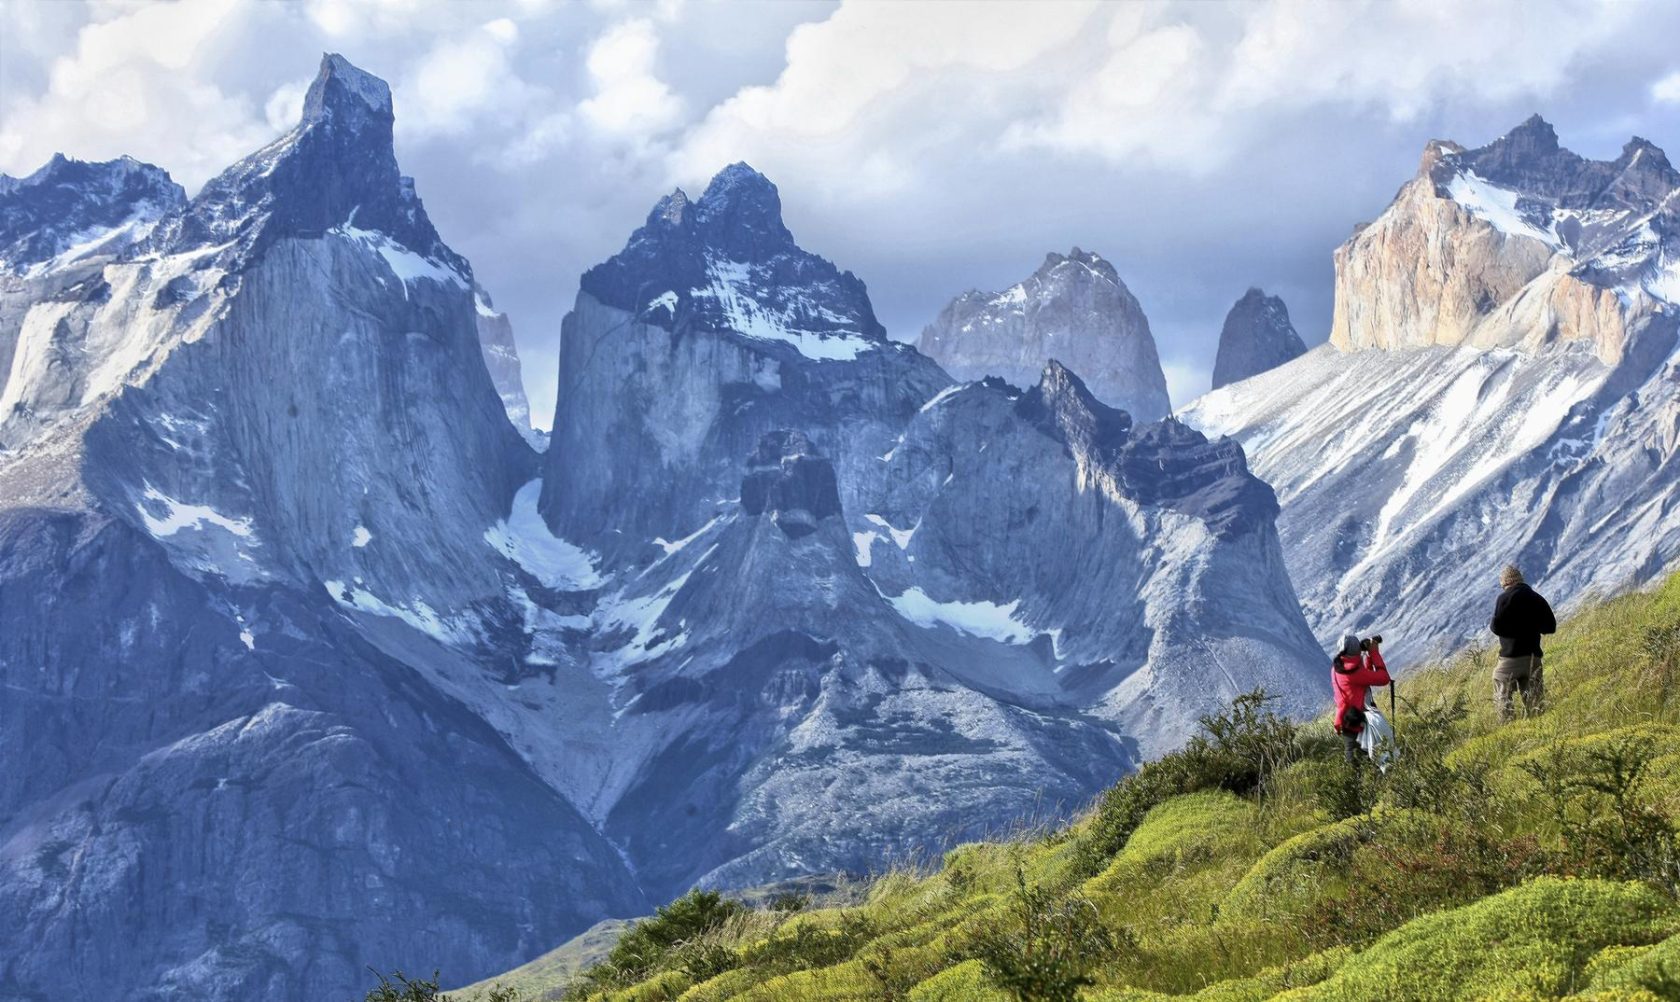 Hikers watch for wildlife in Patagonia's Torres del Paine National Park